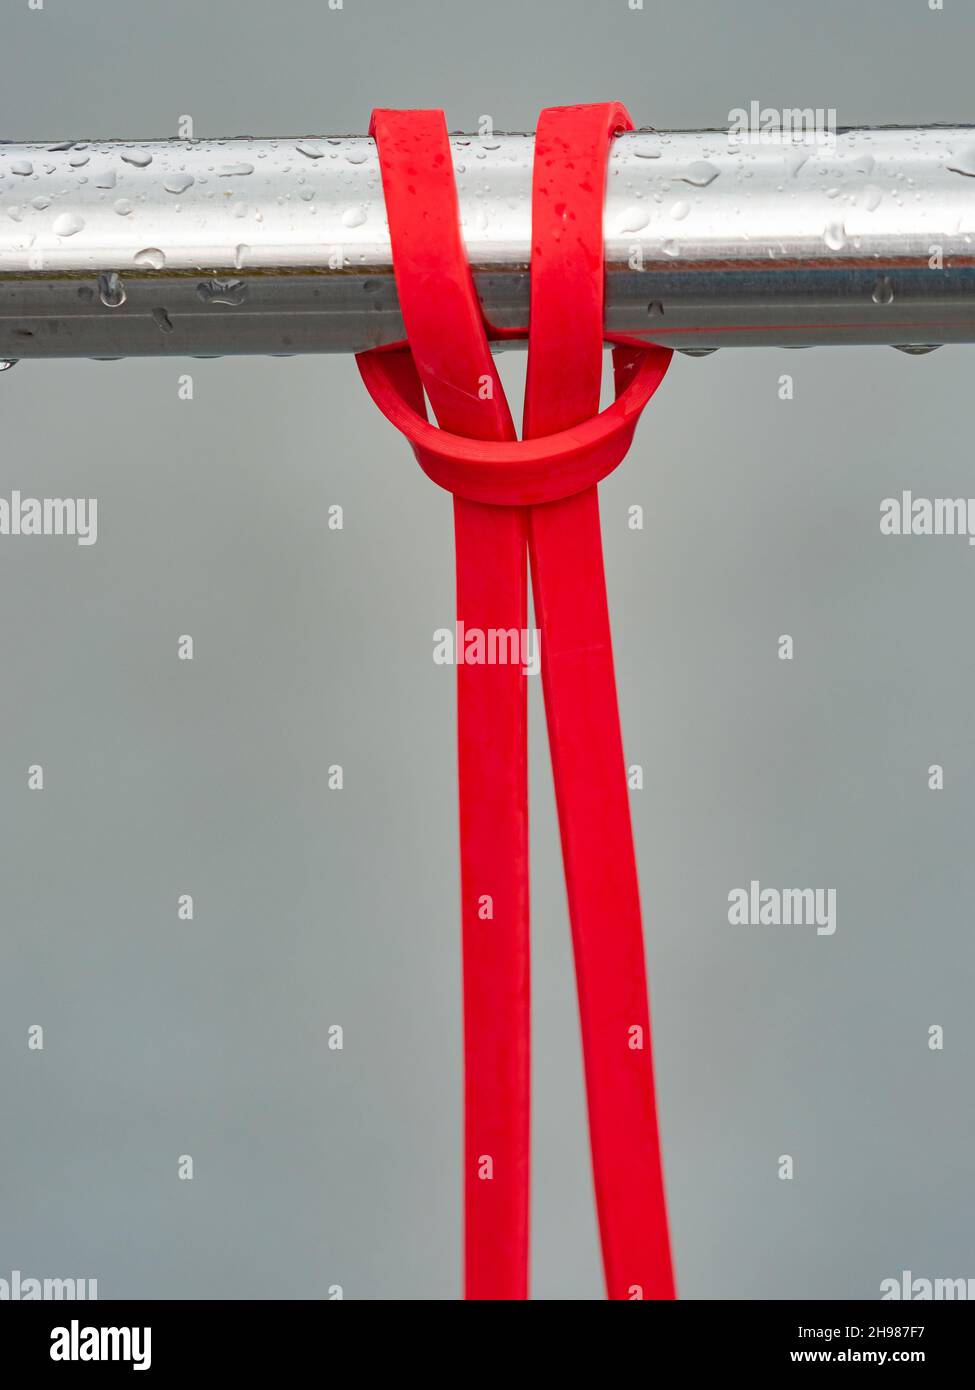 Close-up of a rubber elastic band training knot hanging on a